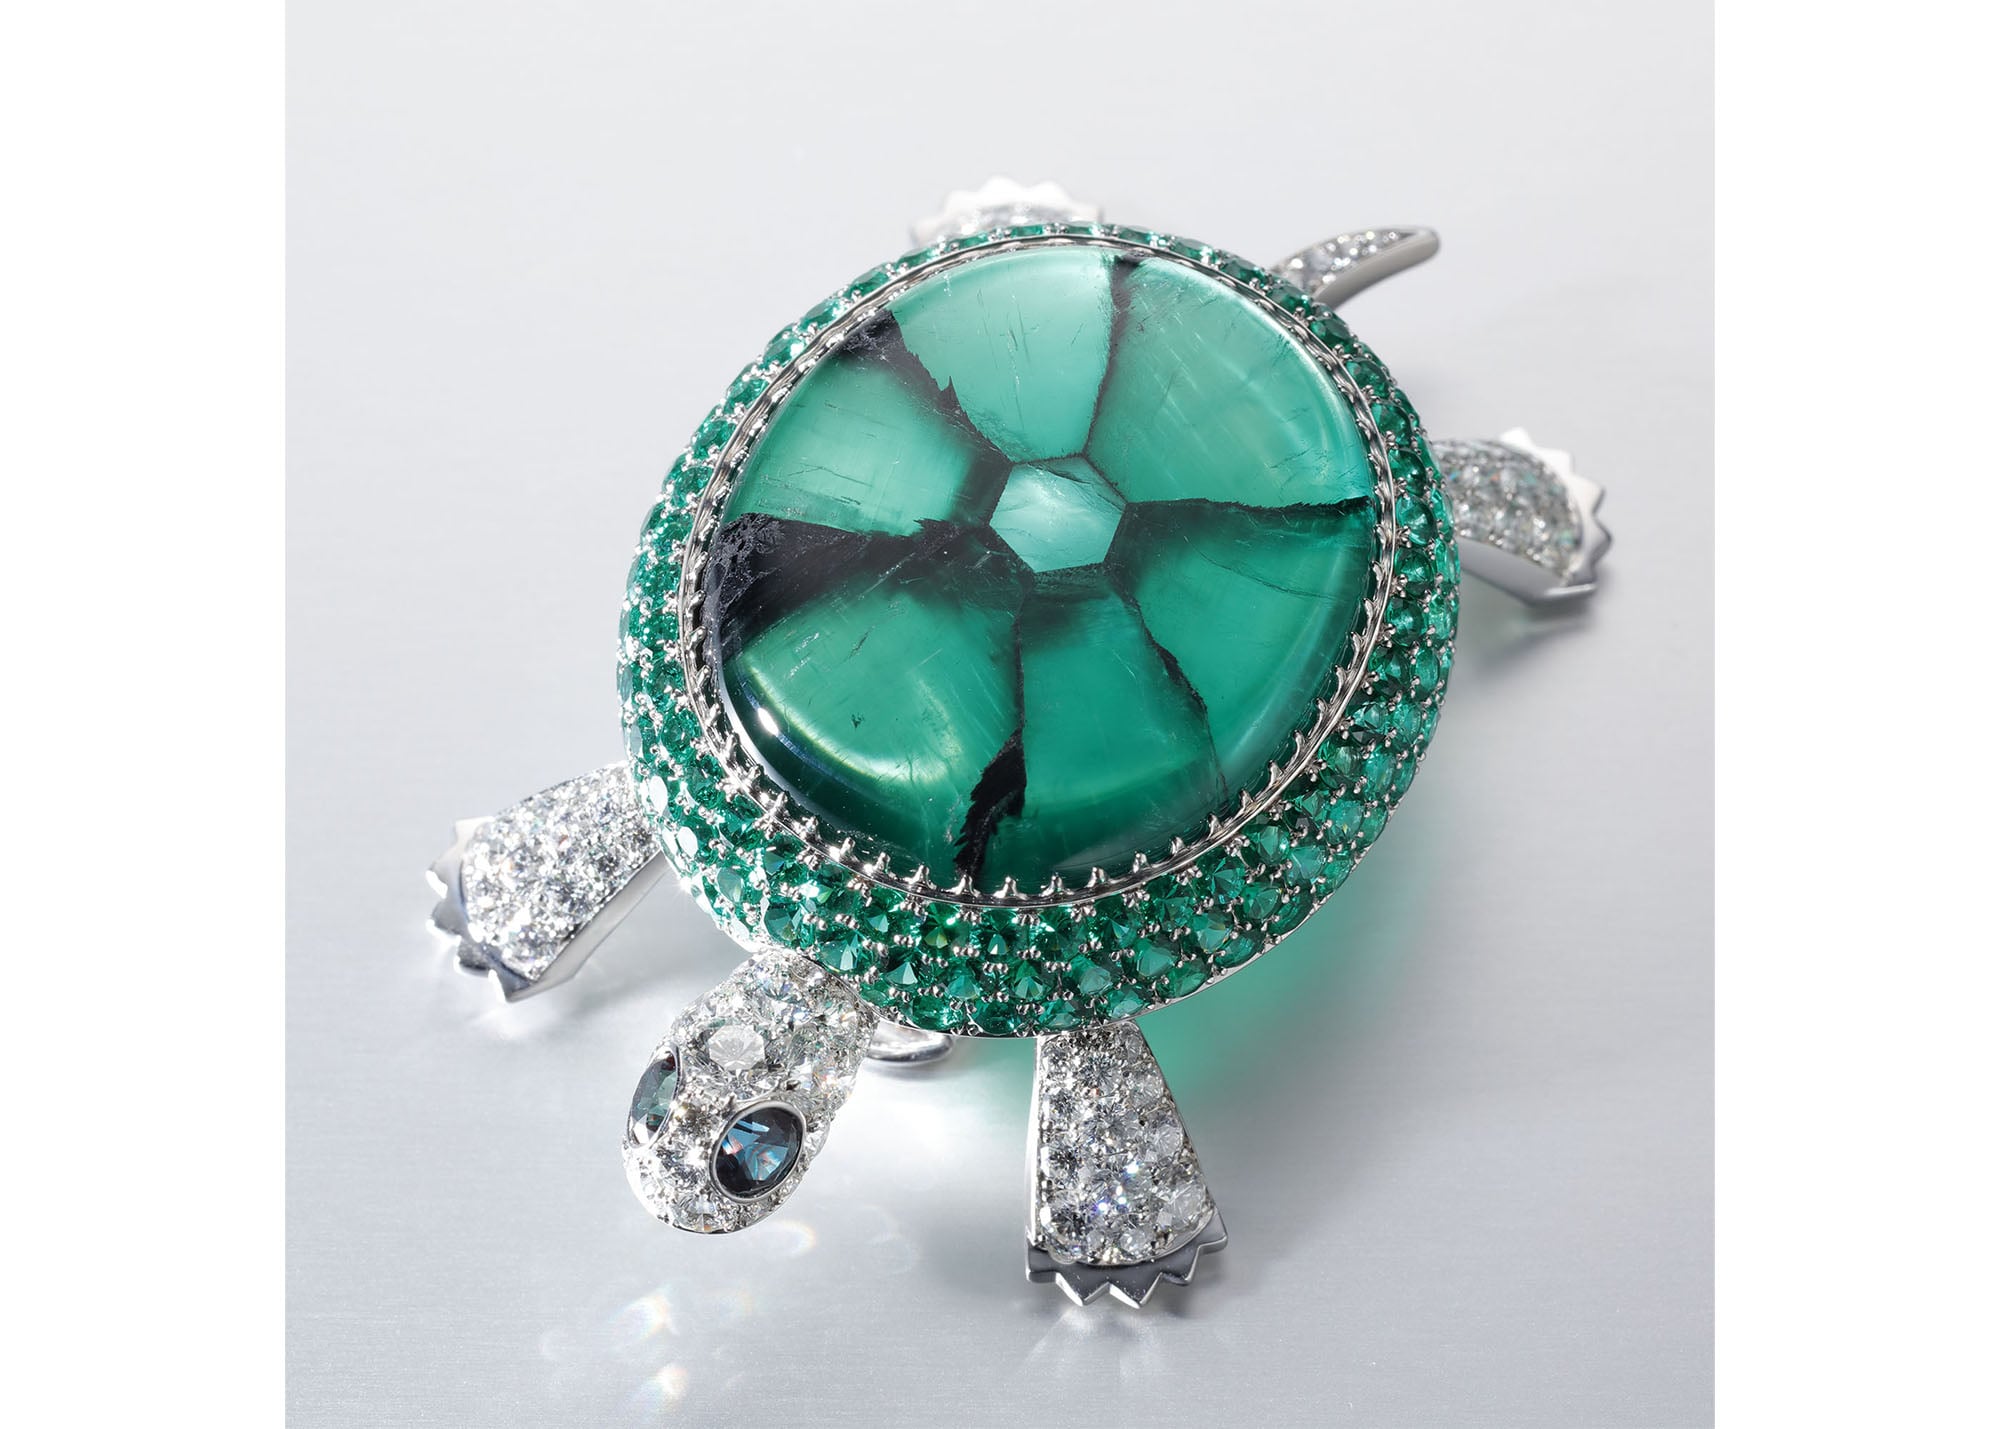  The “Turtle” brooch is designed using the unique crystal structure of the Trapiche Emerald. It is extremely rare to find a Trapiche Emerald with magnificent pattern, that clearly appears like this brooch. Brooch, Pt950, Trapiche Emerald, Emerald Diamond, Alexandrite (Not for Sale)